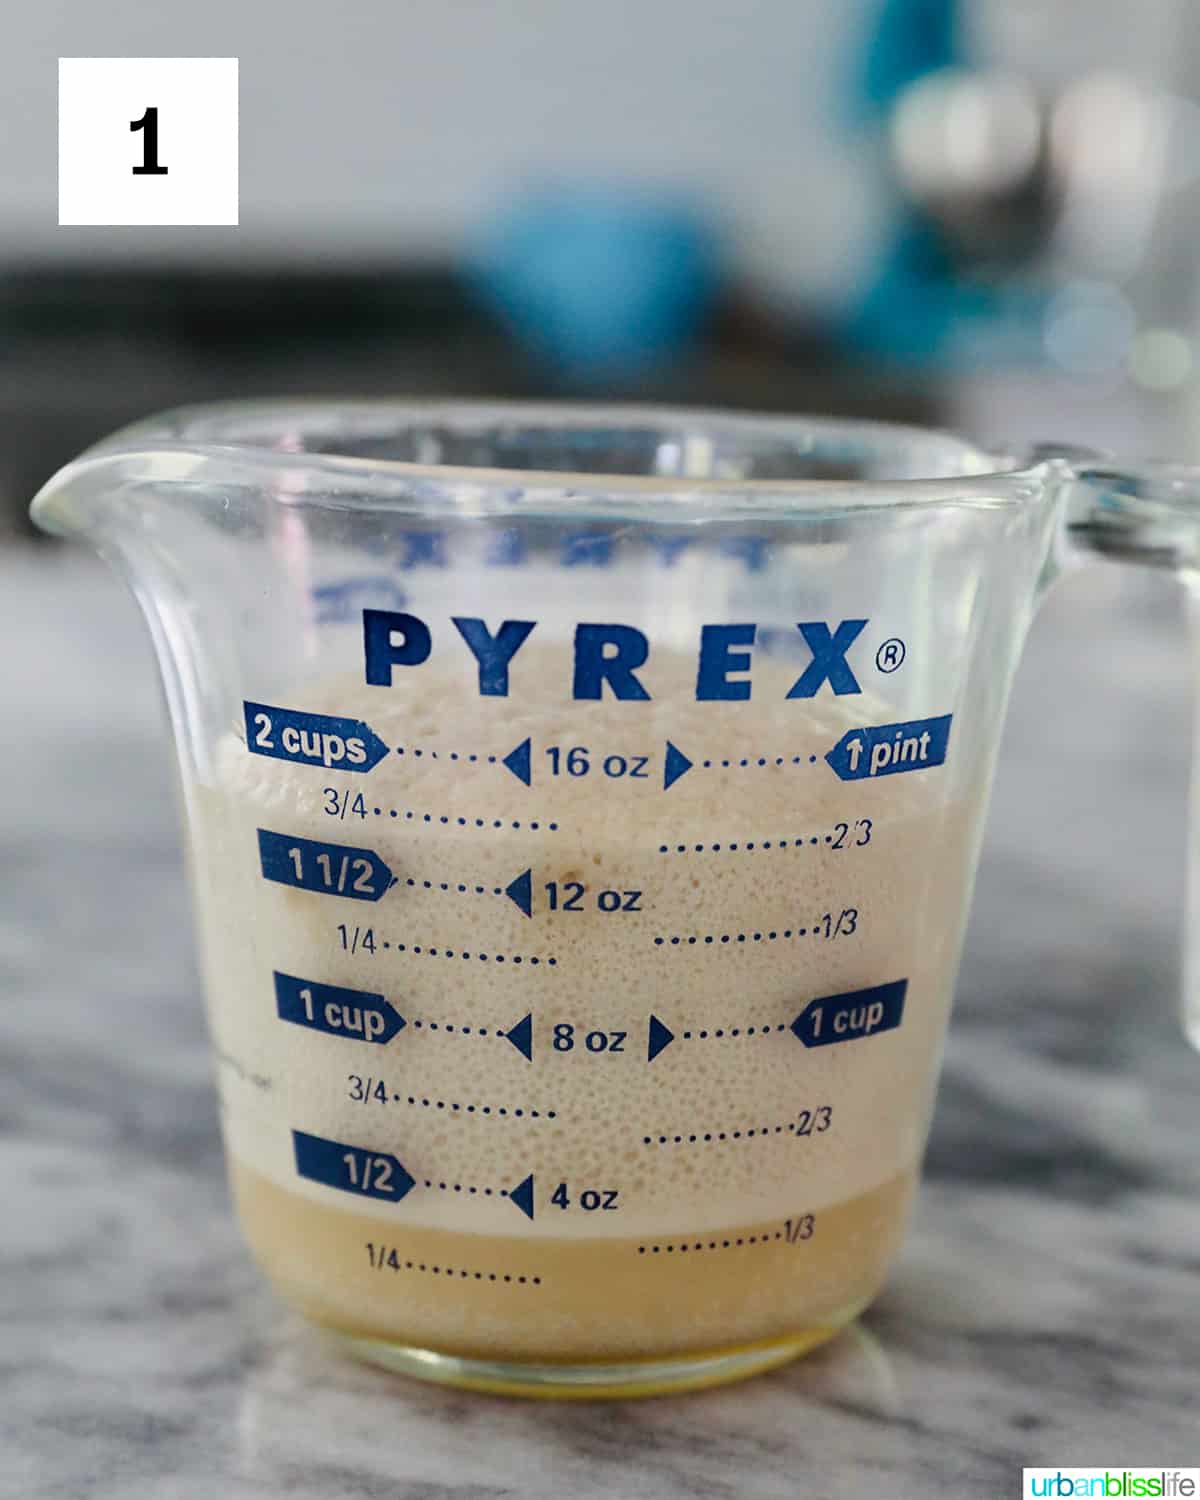 glass Pyrex measuring cup with yeast rising on a marble countertop.